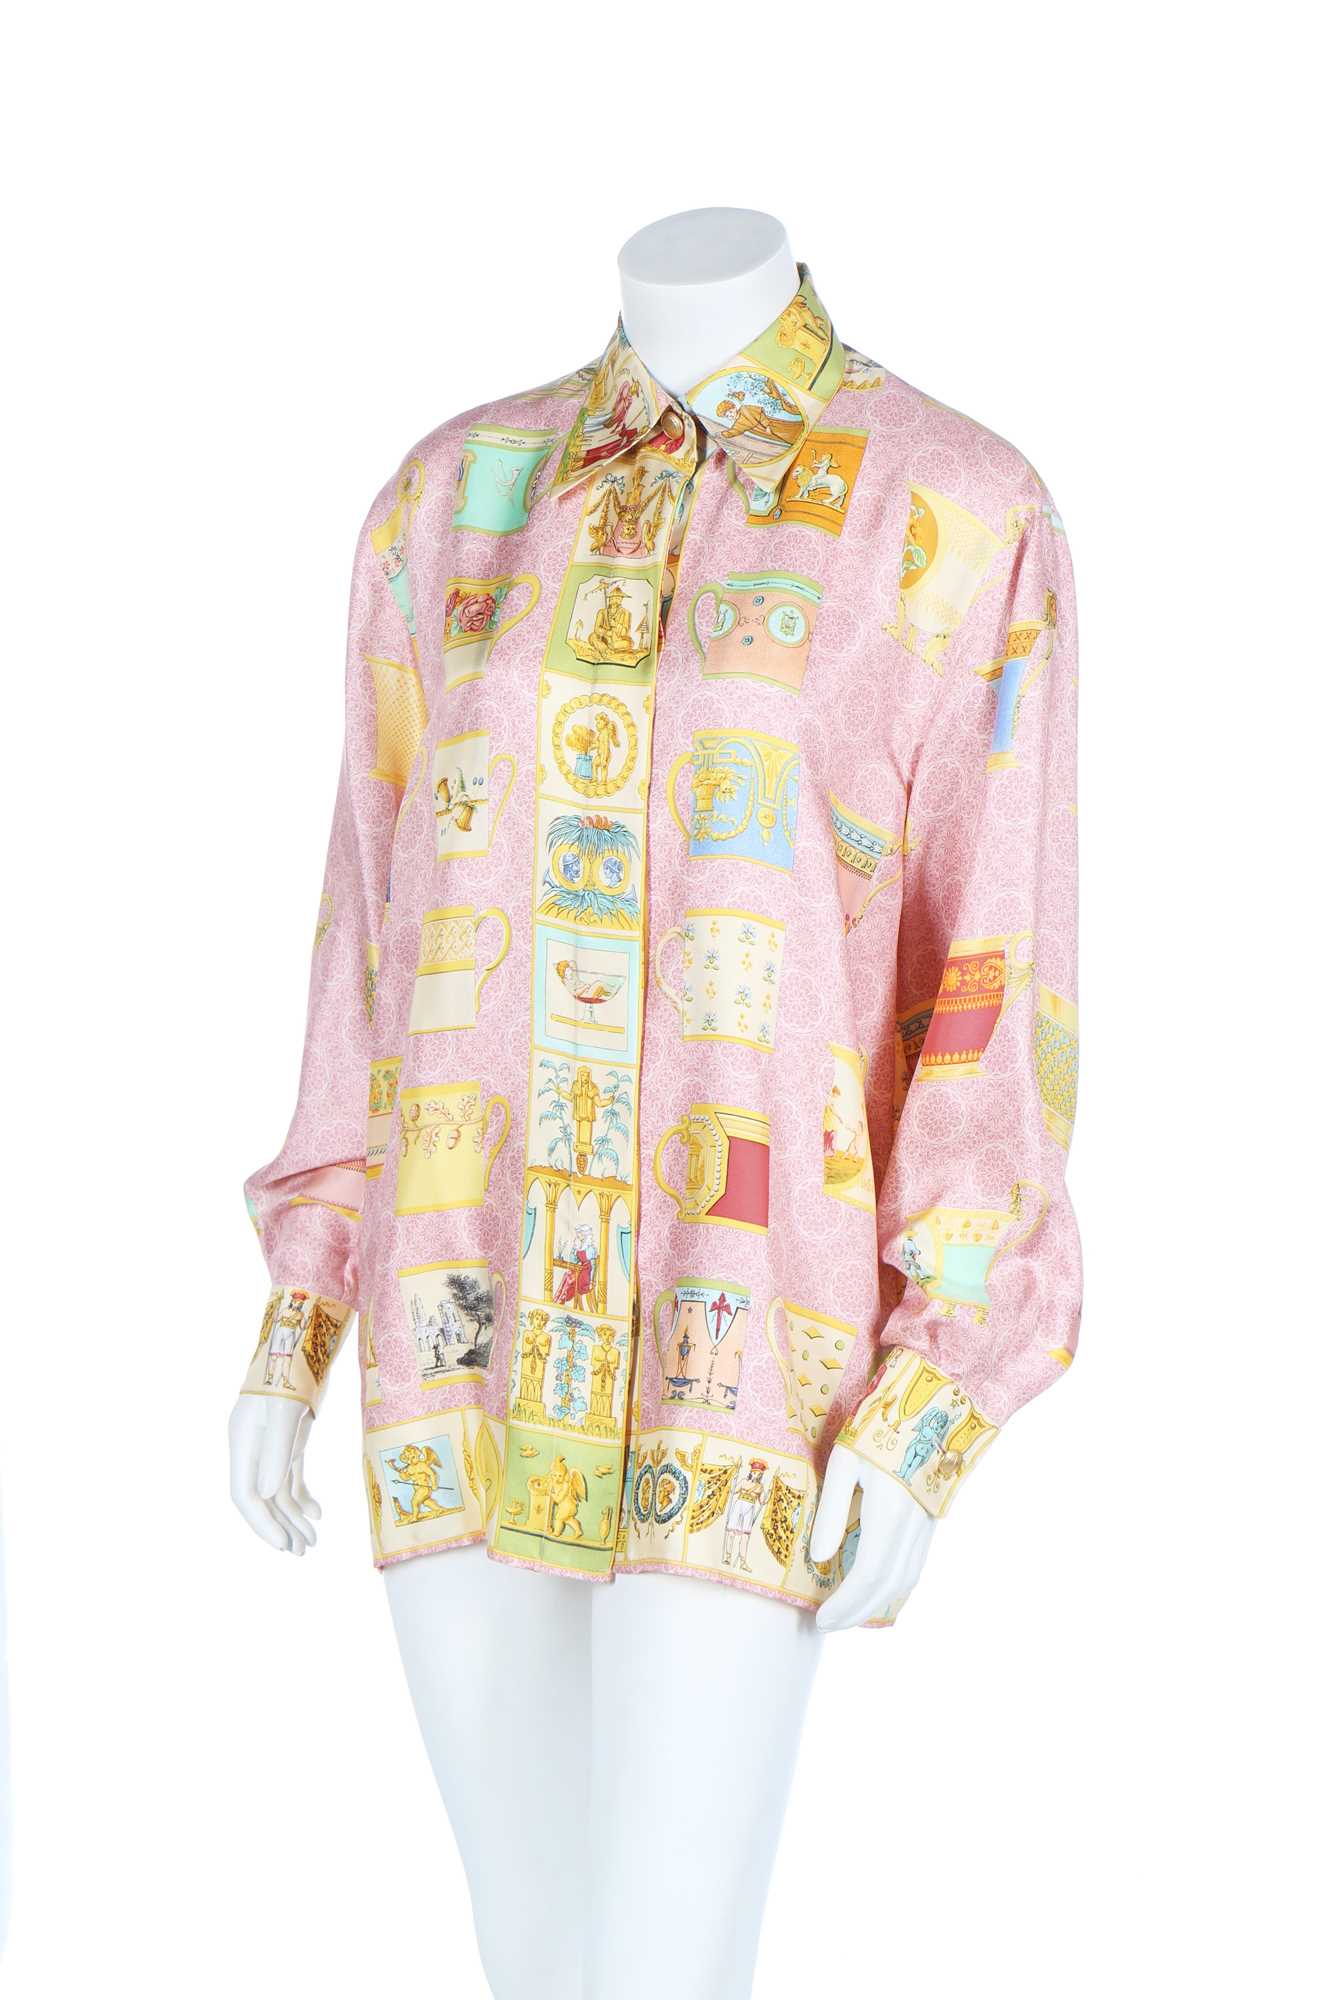 Lot 171 - A Gucci silk shirt printed with ornate 'porcelain' mugs, 1990s